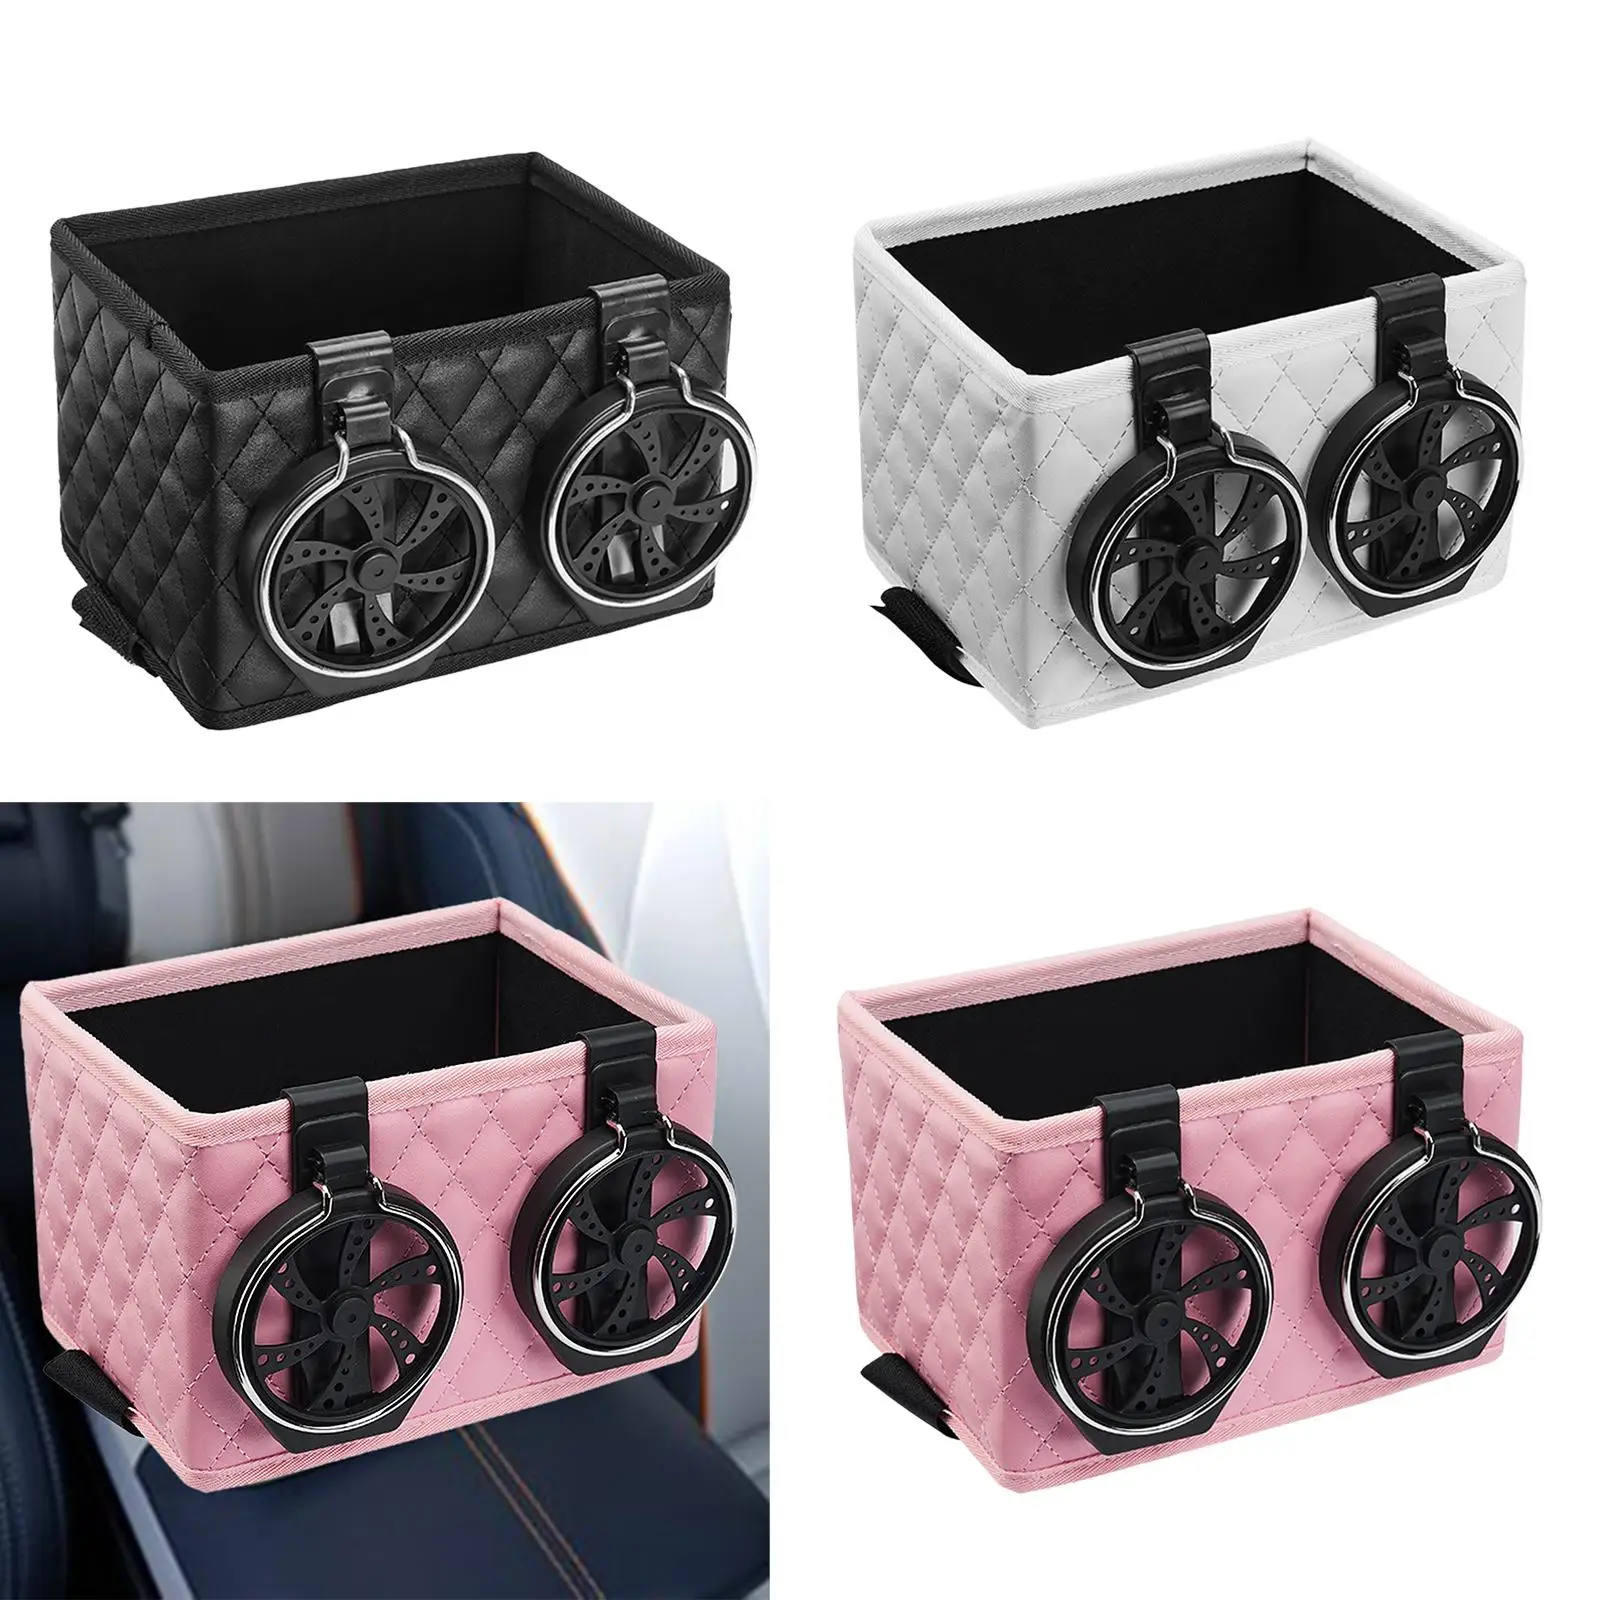 Water Cup Holder Gadgets Holder 2 in 1 Car Storage Box for Paper Towels